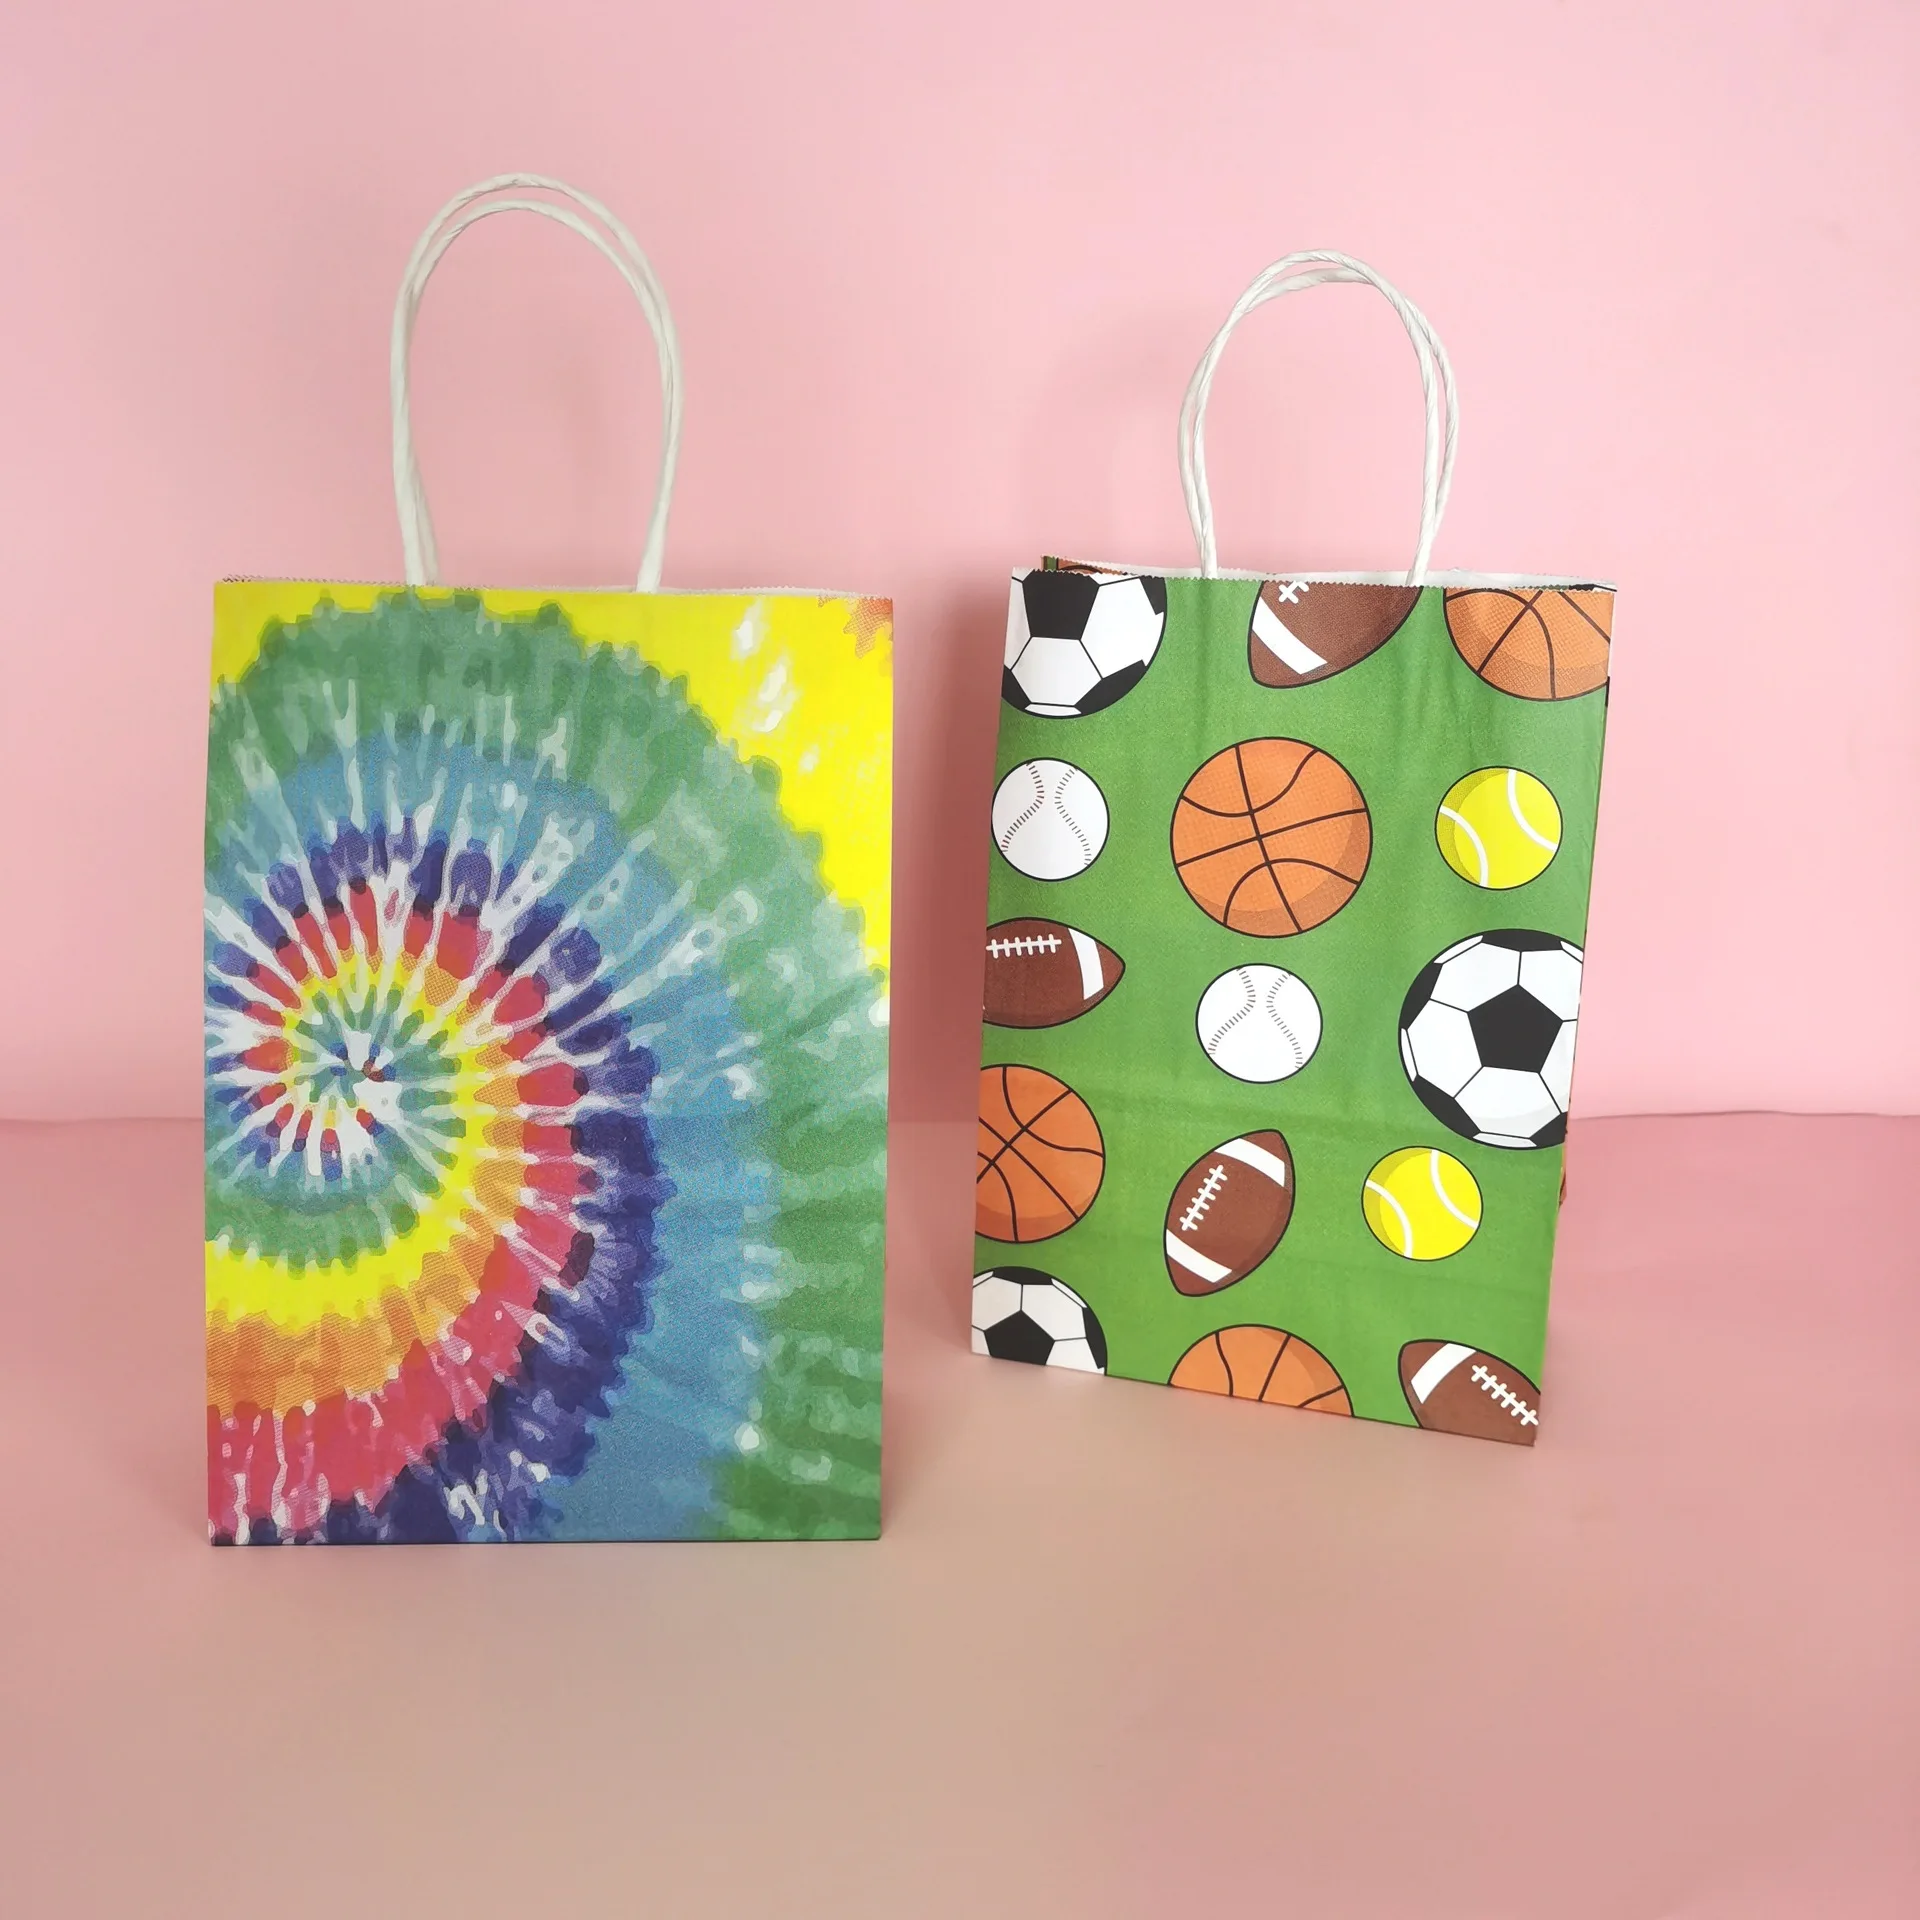 New style kraft paper tote bag creative football tie-dye gift bag business gift colorful shopping bag